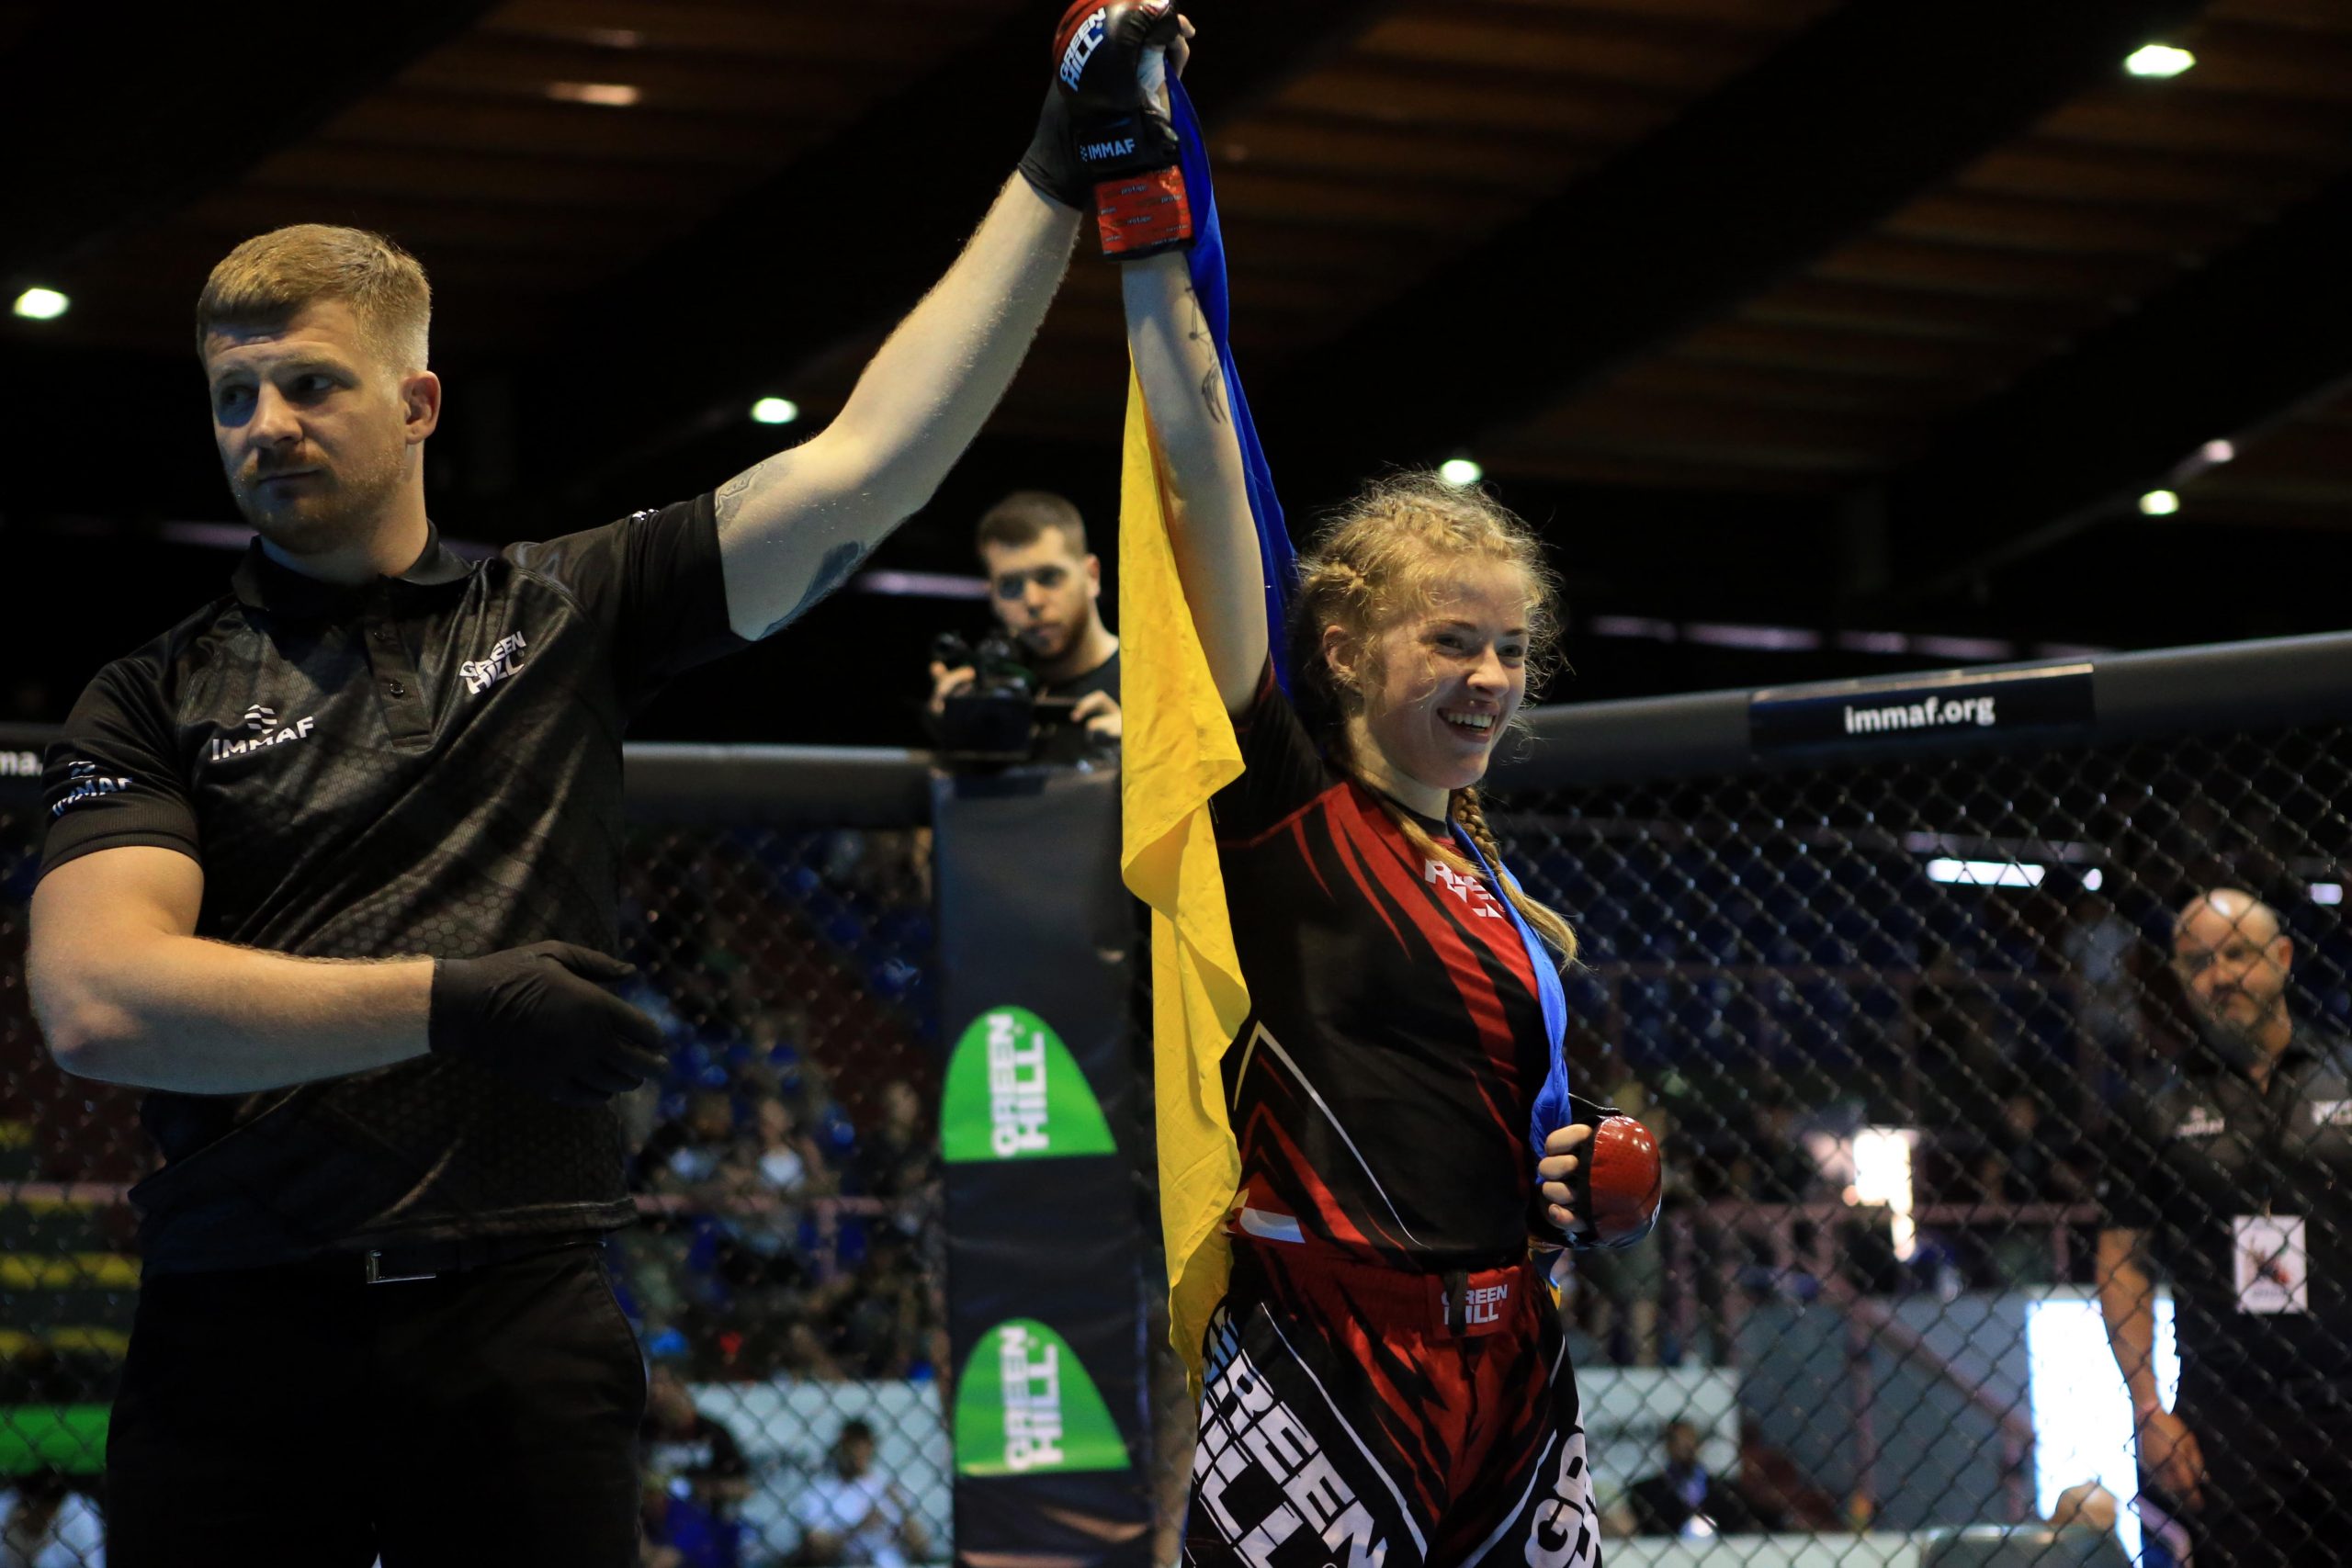 Ukraine's Daryna Harber Impresses With Submission Win Over World Silver Medalist Eriksson